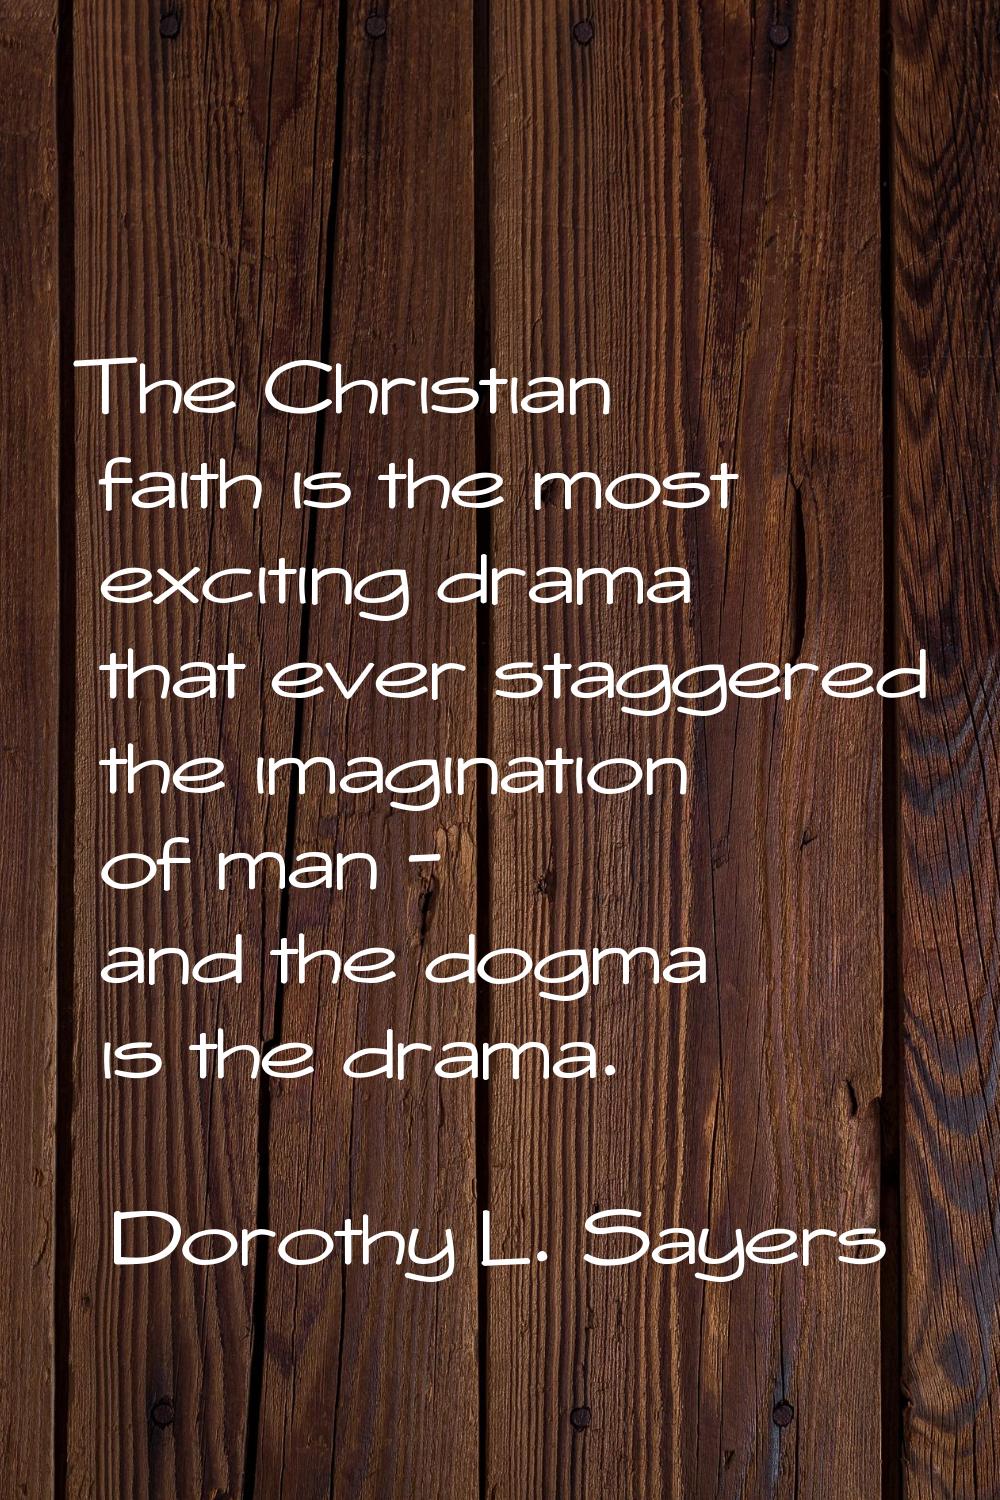 The Christian faith is the most exciting drama that ever staggered the imagination of man - and the